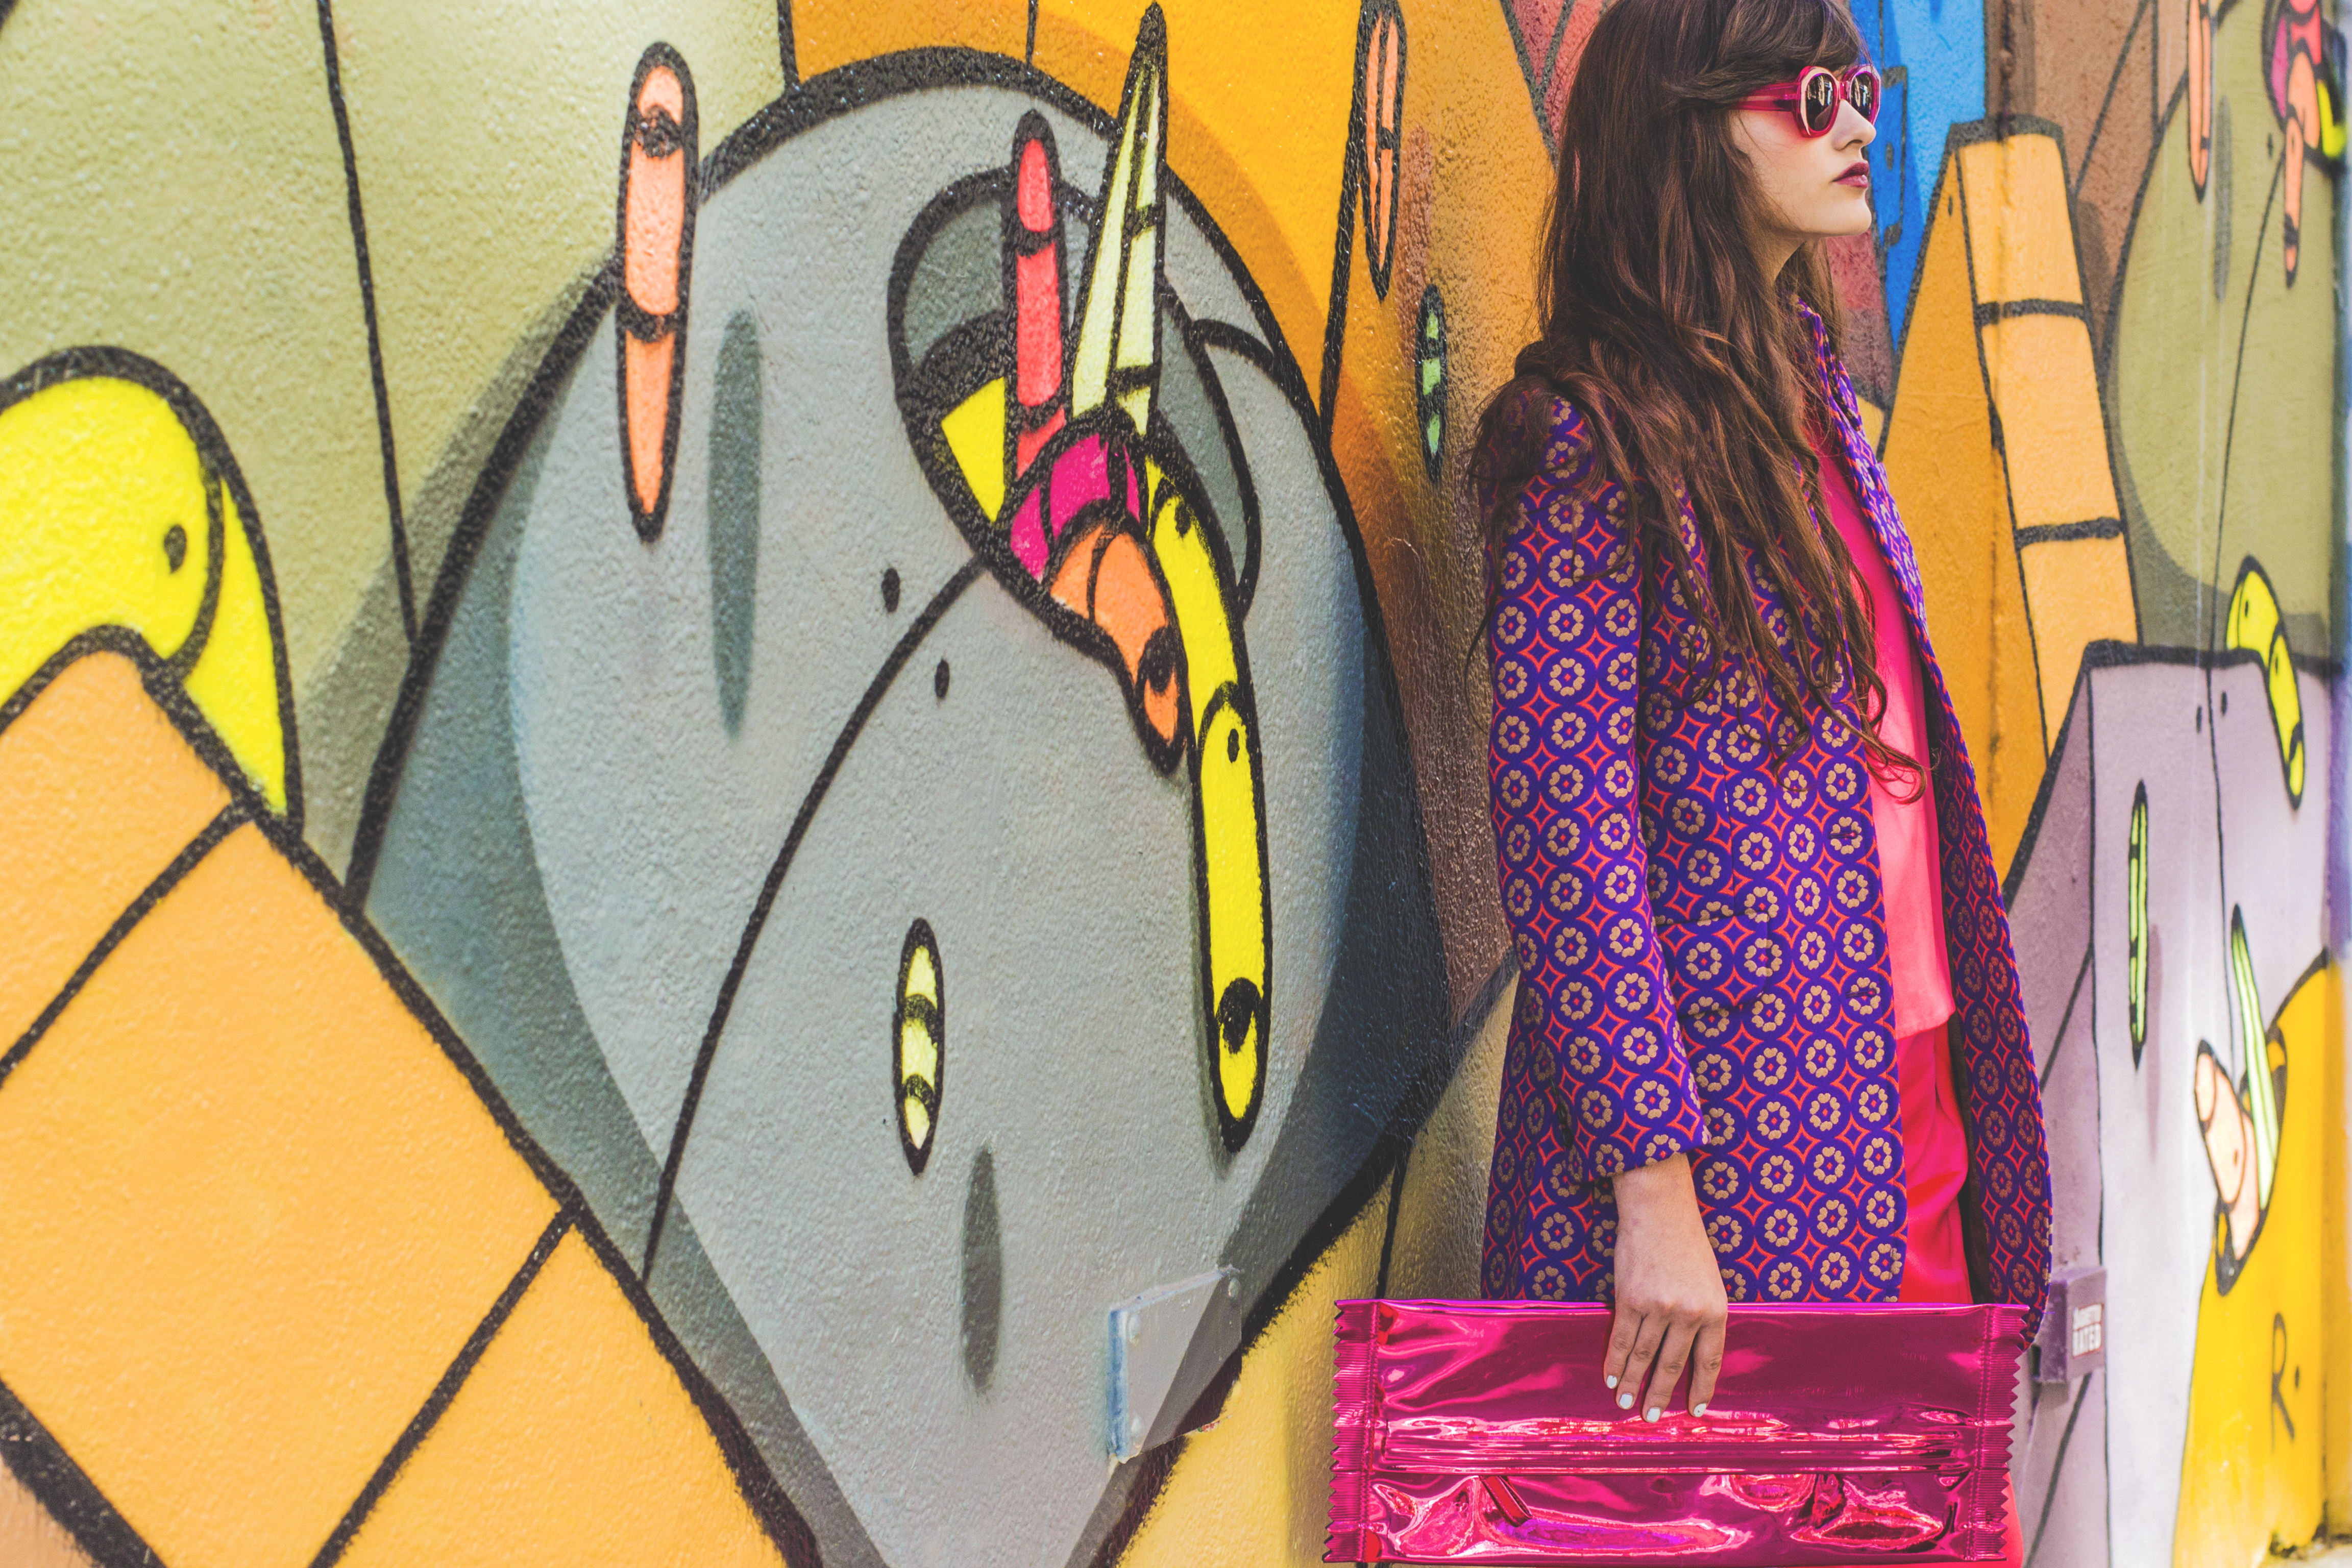 multicolored geometric print coat MIU MIU. fuchsia silk top and matching trousers LES CHIFFONIERS. fuchsia patent leather candy wrapper clutch MAISON MARTIN MARGIELA. red molded flower necklace J CREW. translucent pink sunglasses KAREN WALKER. 